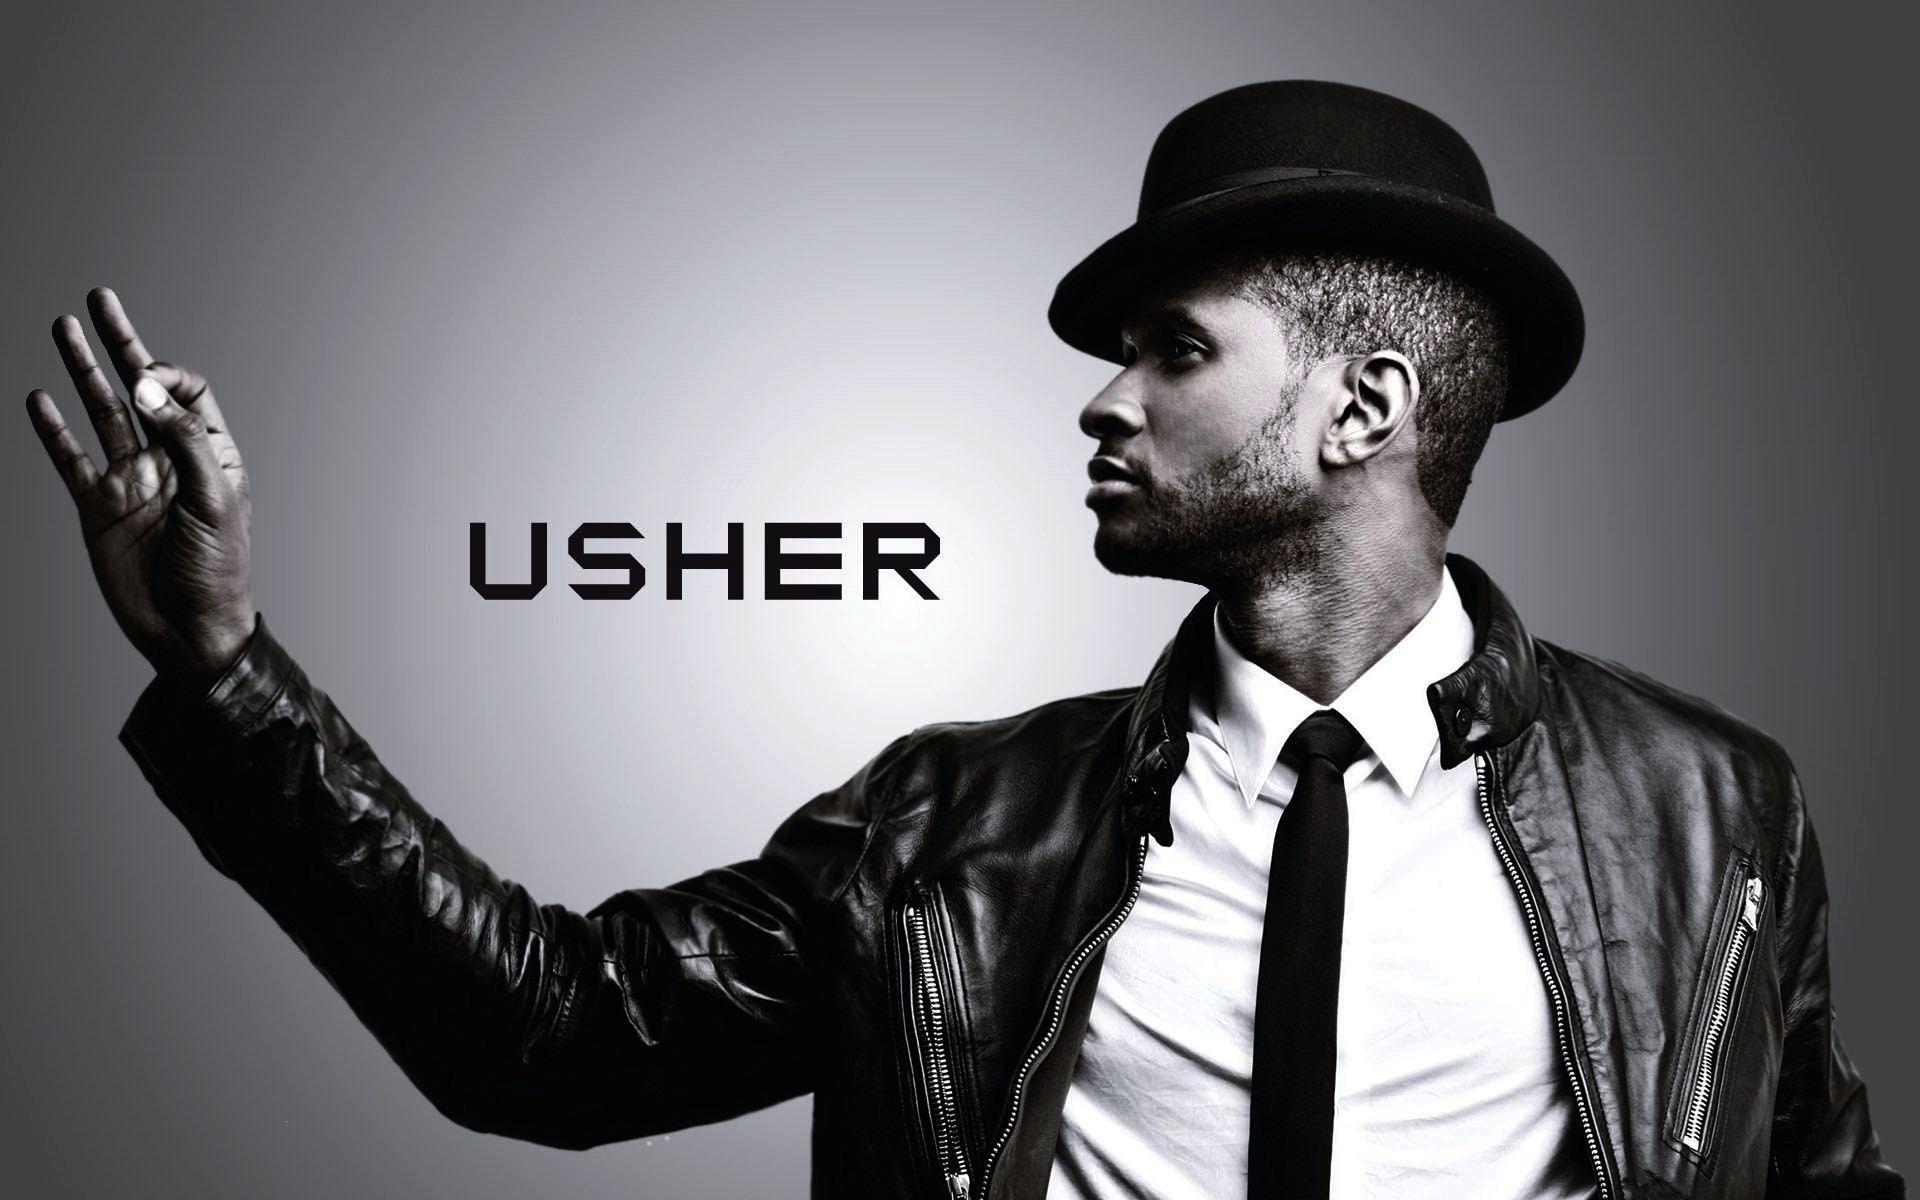 Usher wearing a leather jacket and a hat - Usher